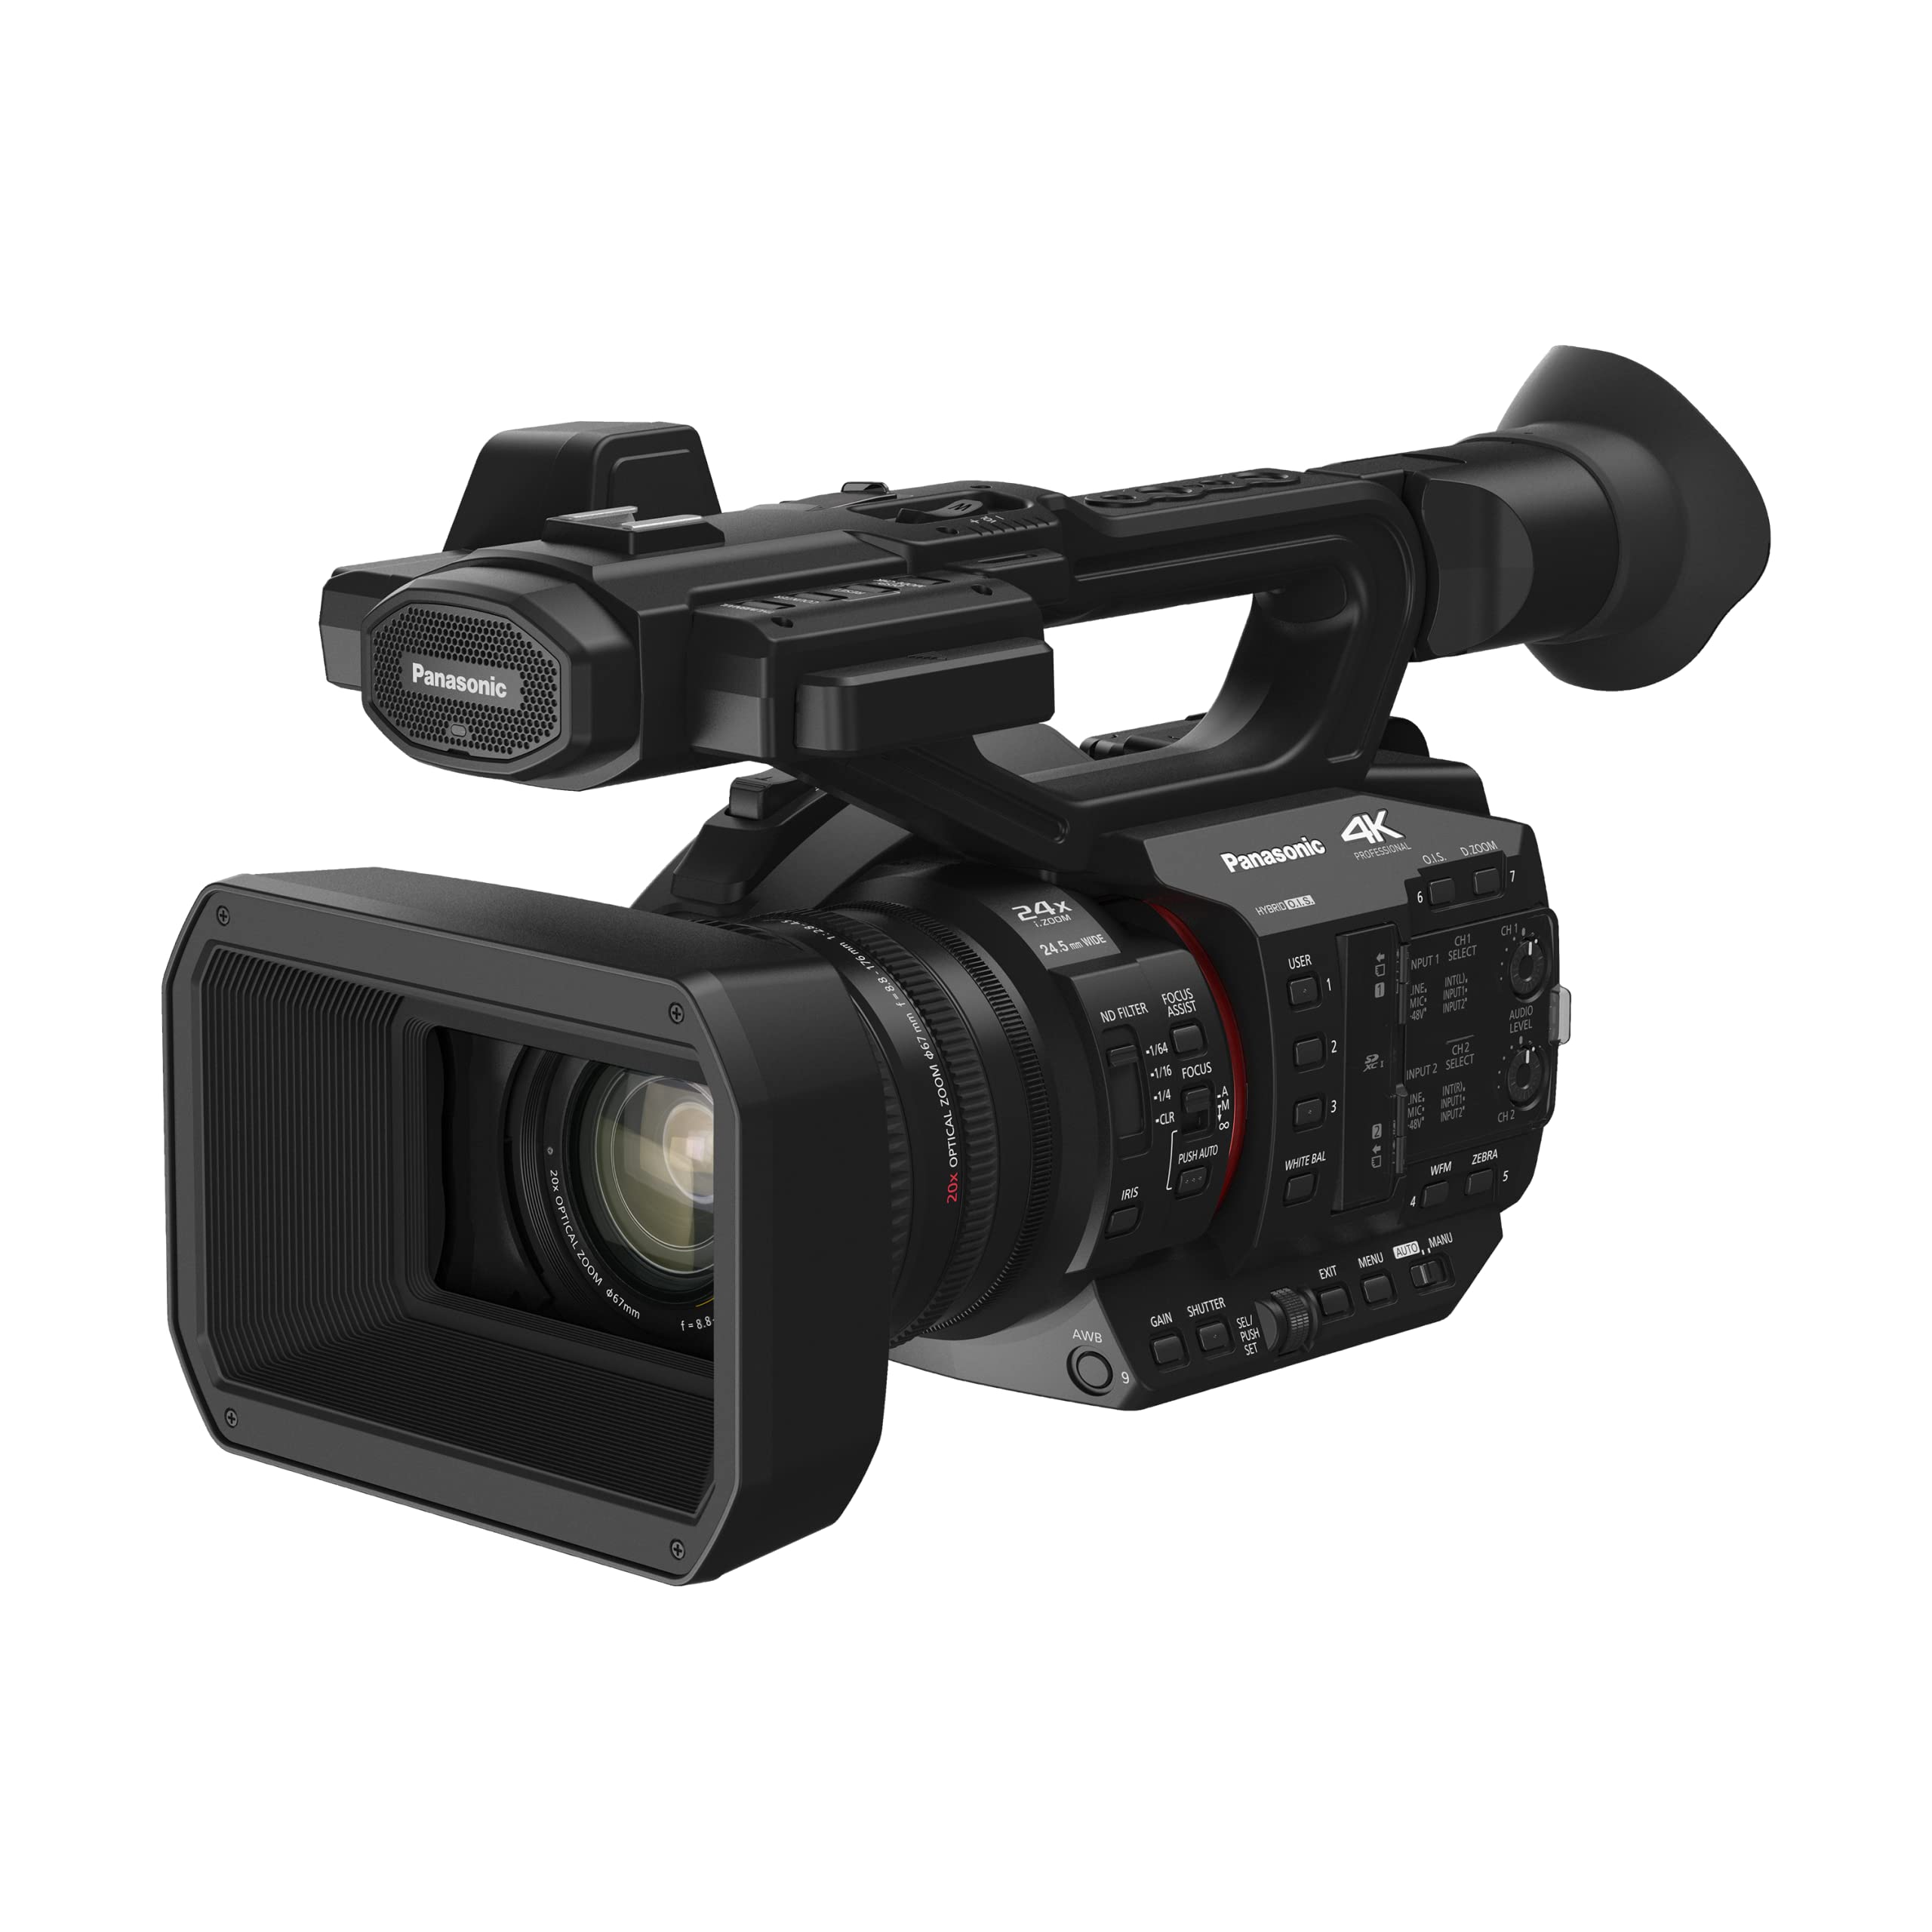 Panasonic Camcorder, Professional Quality 4K 60p, 1.0-inch Sensor, 24.5mm Wide-Angle Lens and Optical 20x Zoom, Great for News, Interviews, and Events - HC-X20